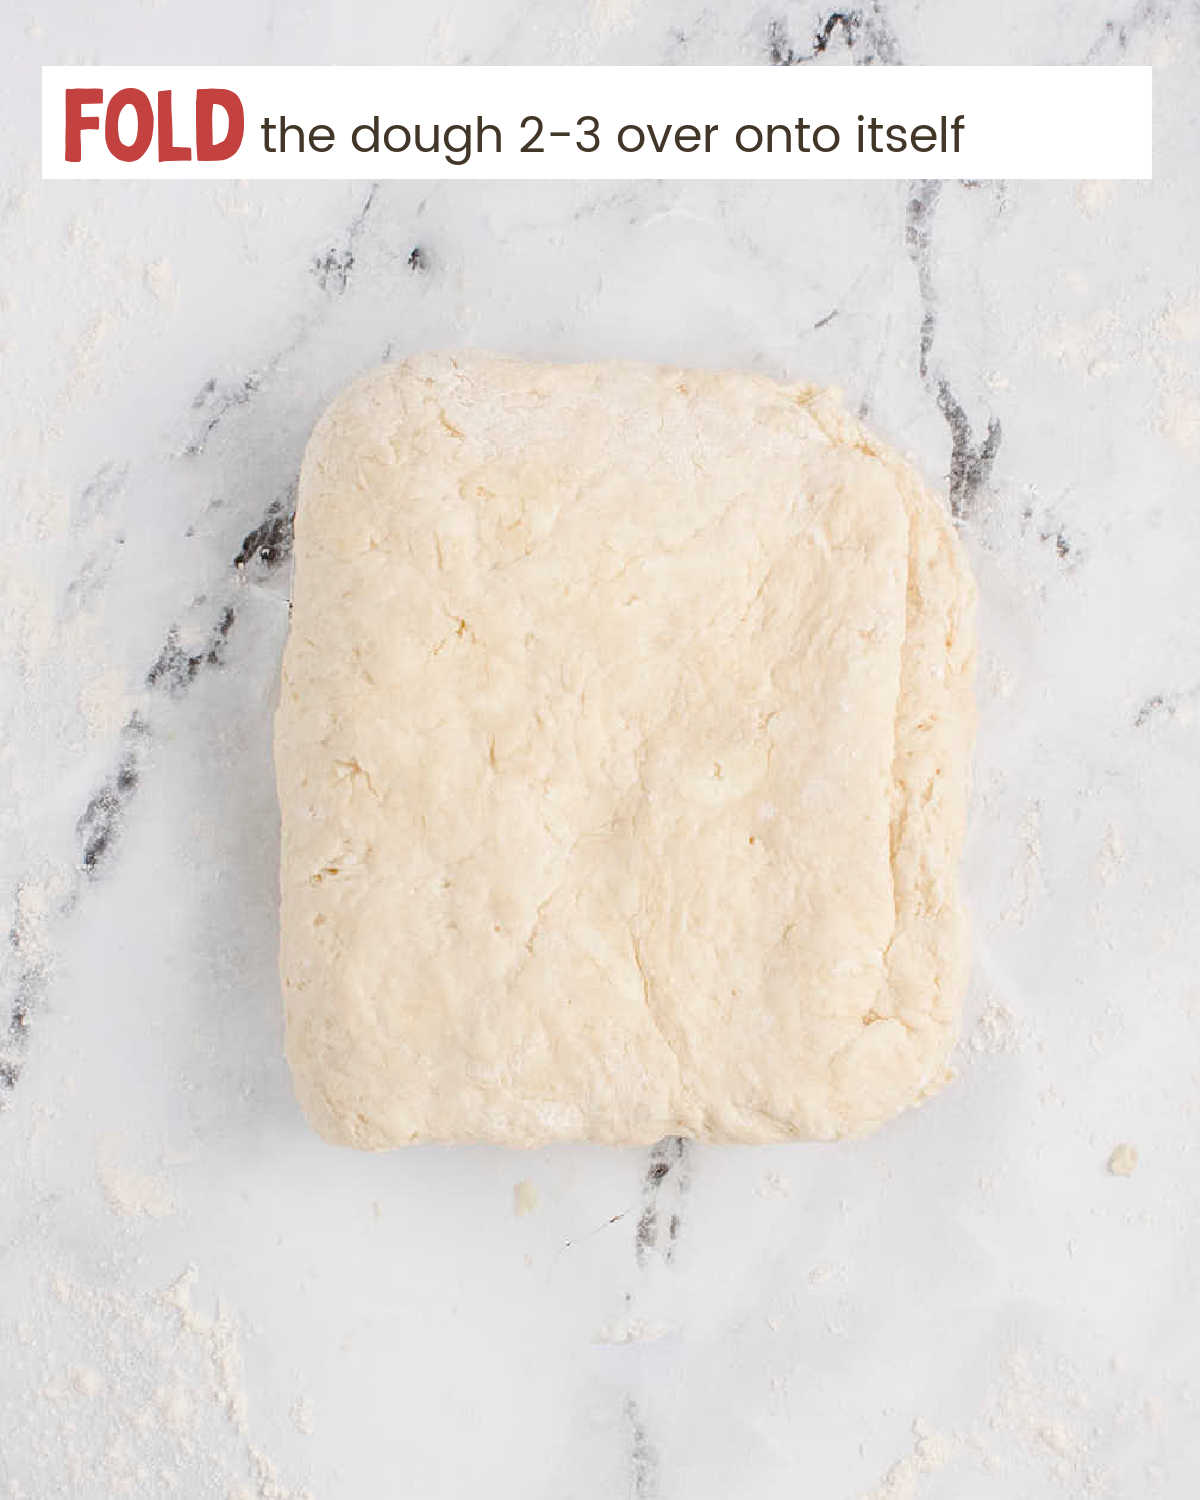 Fold the Air Fryer Biscuits dough over onto a piece of marble.